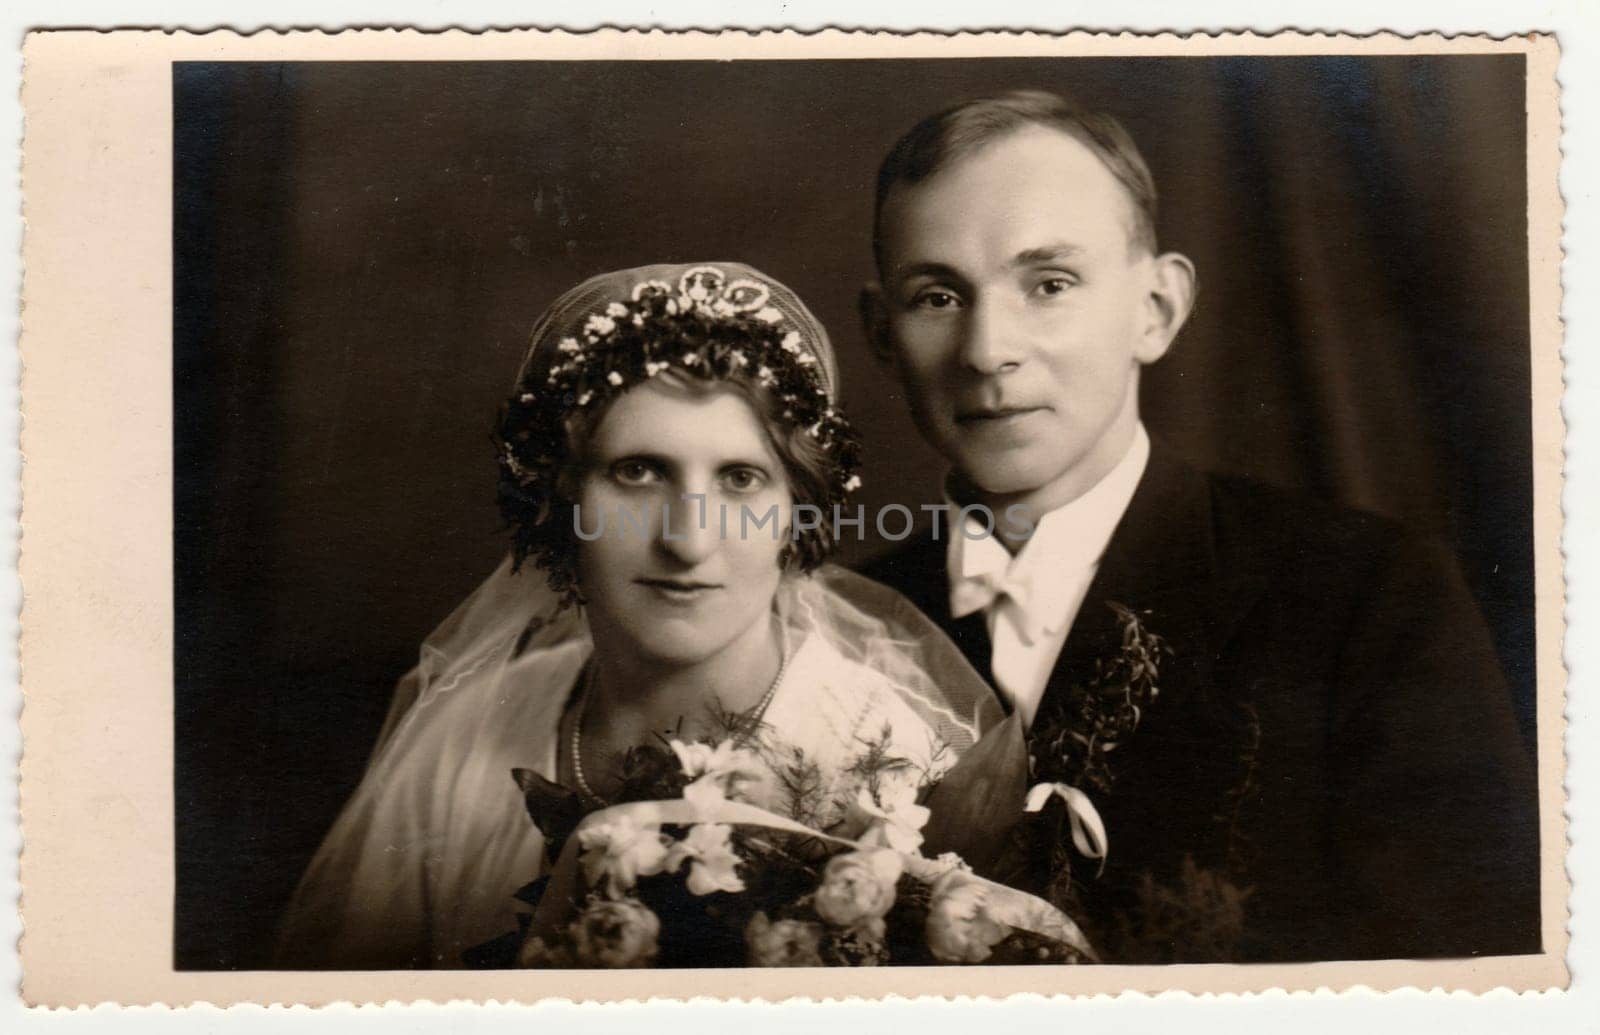 Vintage photo shows newlyweds. Bride wears tiara. Retro black and white photography. Circa 1950s. by roman_nerud